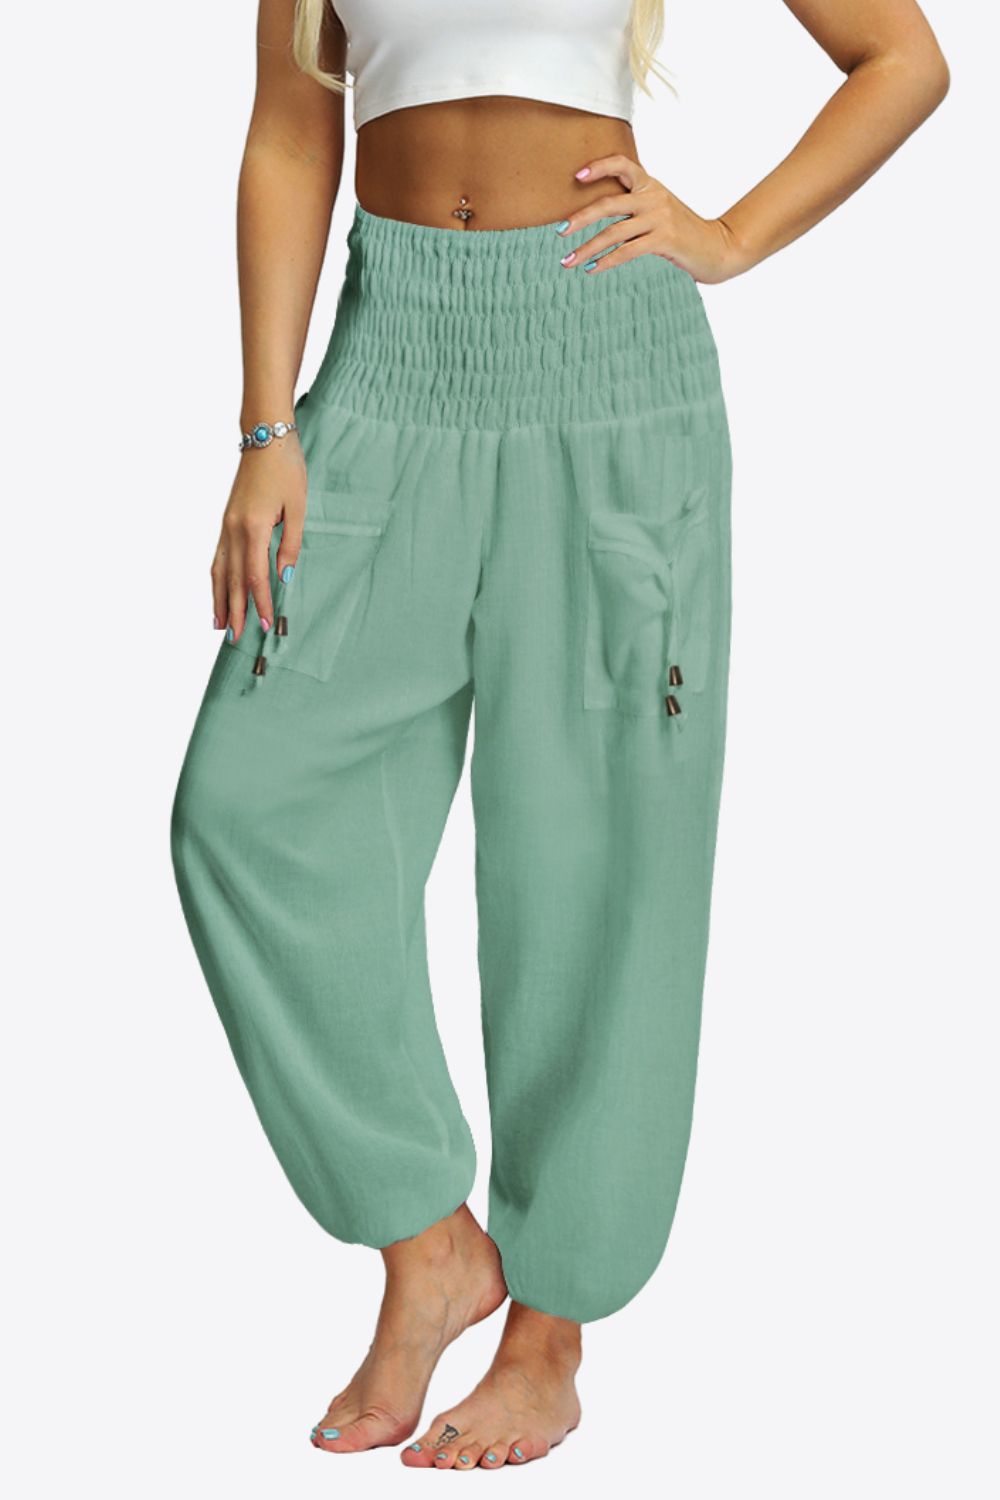 Smocked Long Joggers with Pockets - Green / S - Bottoms - Pants - 4 - 2024